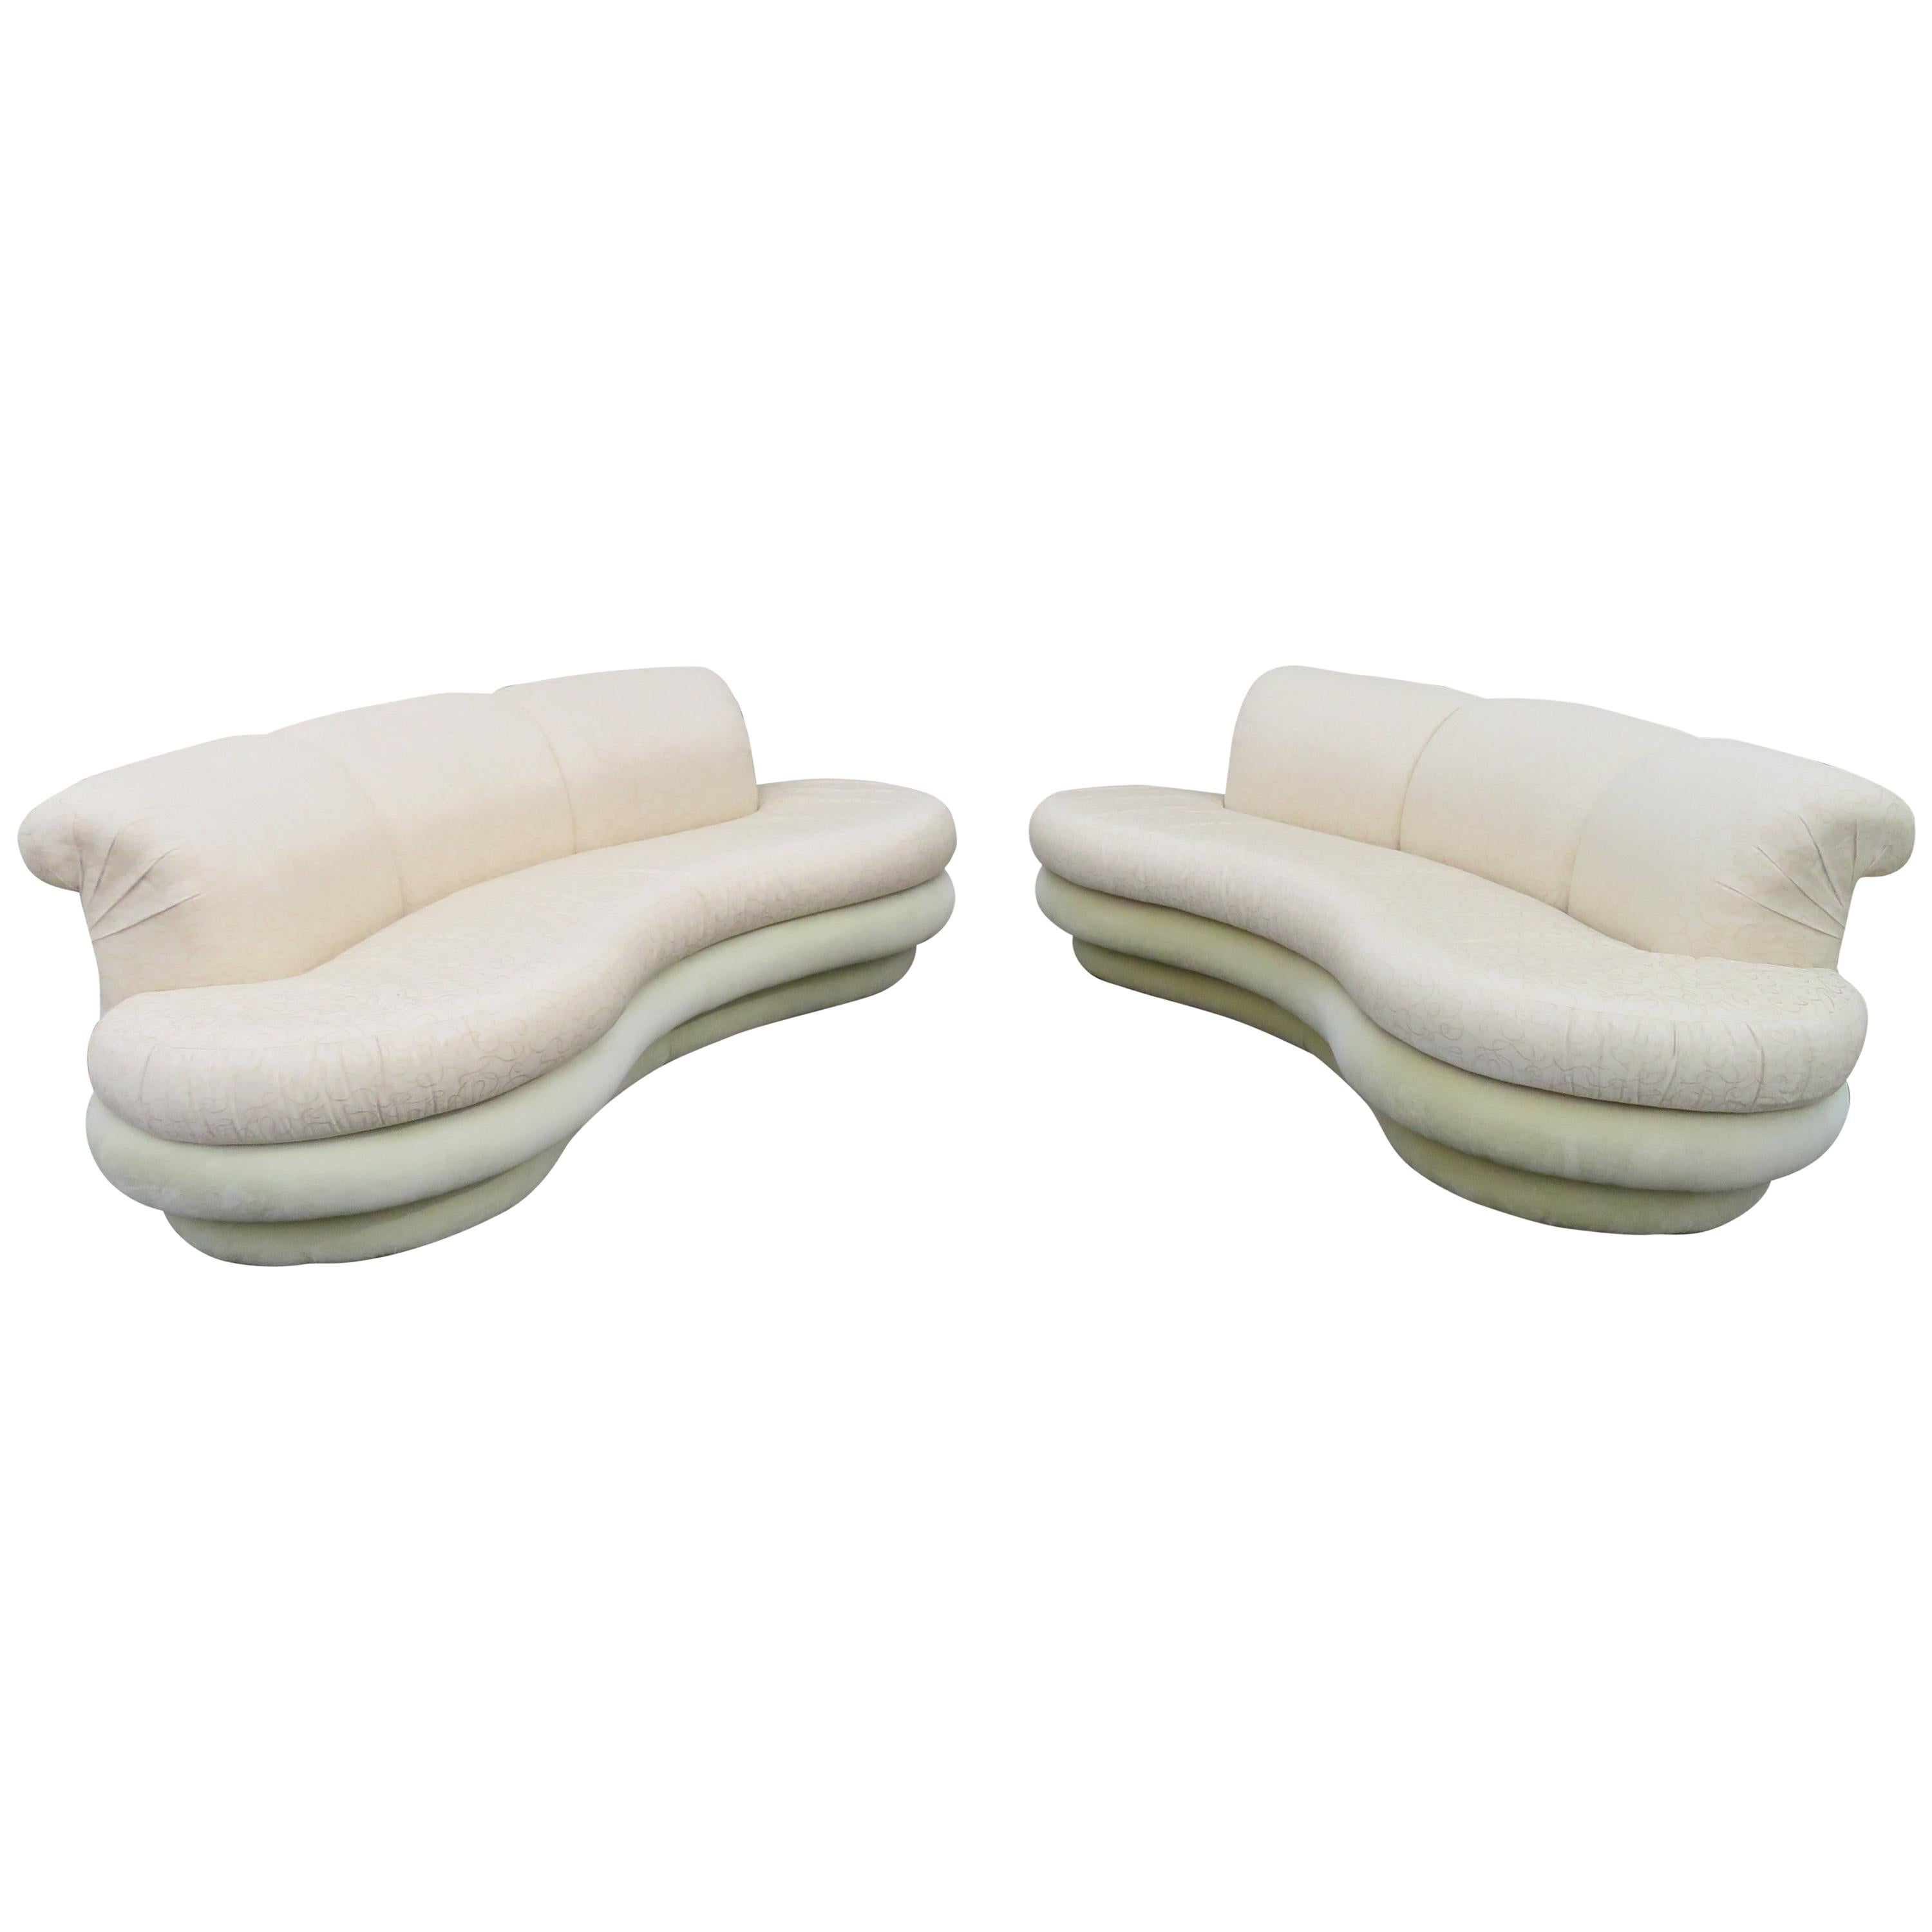 Pair Adrian Pearsall Kidney Shaped Curved Sofa Mid-Century Modern